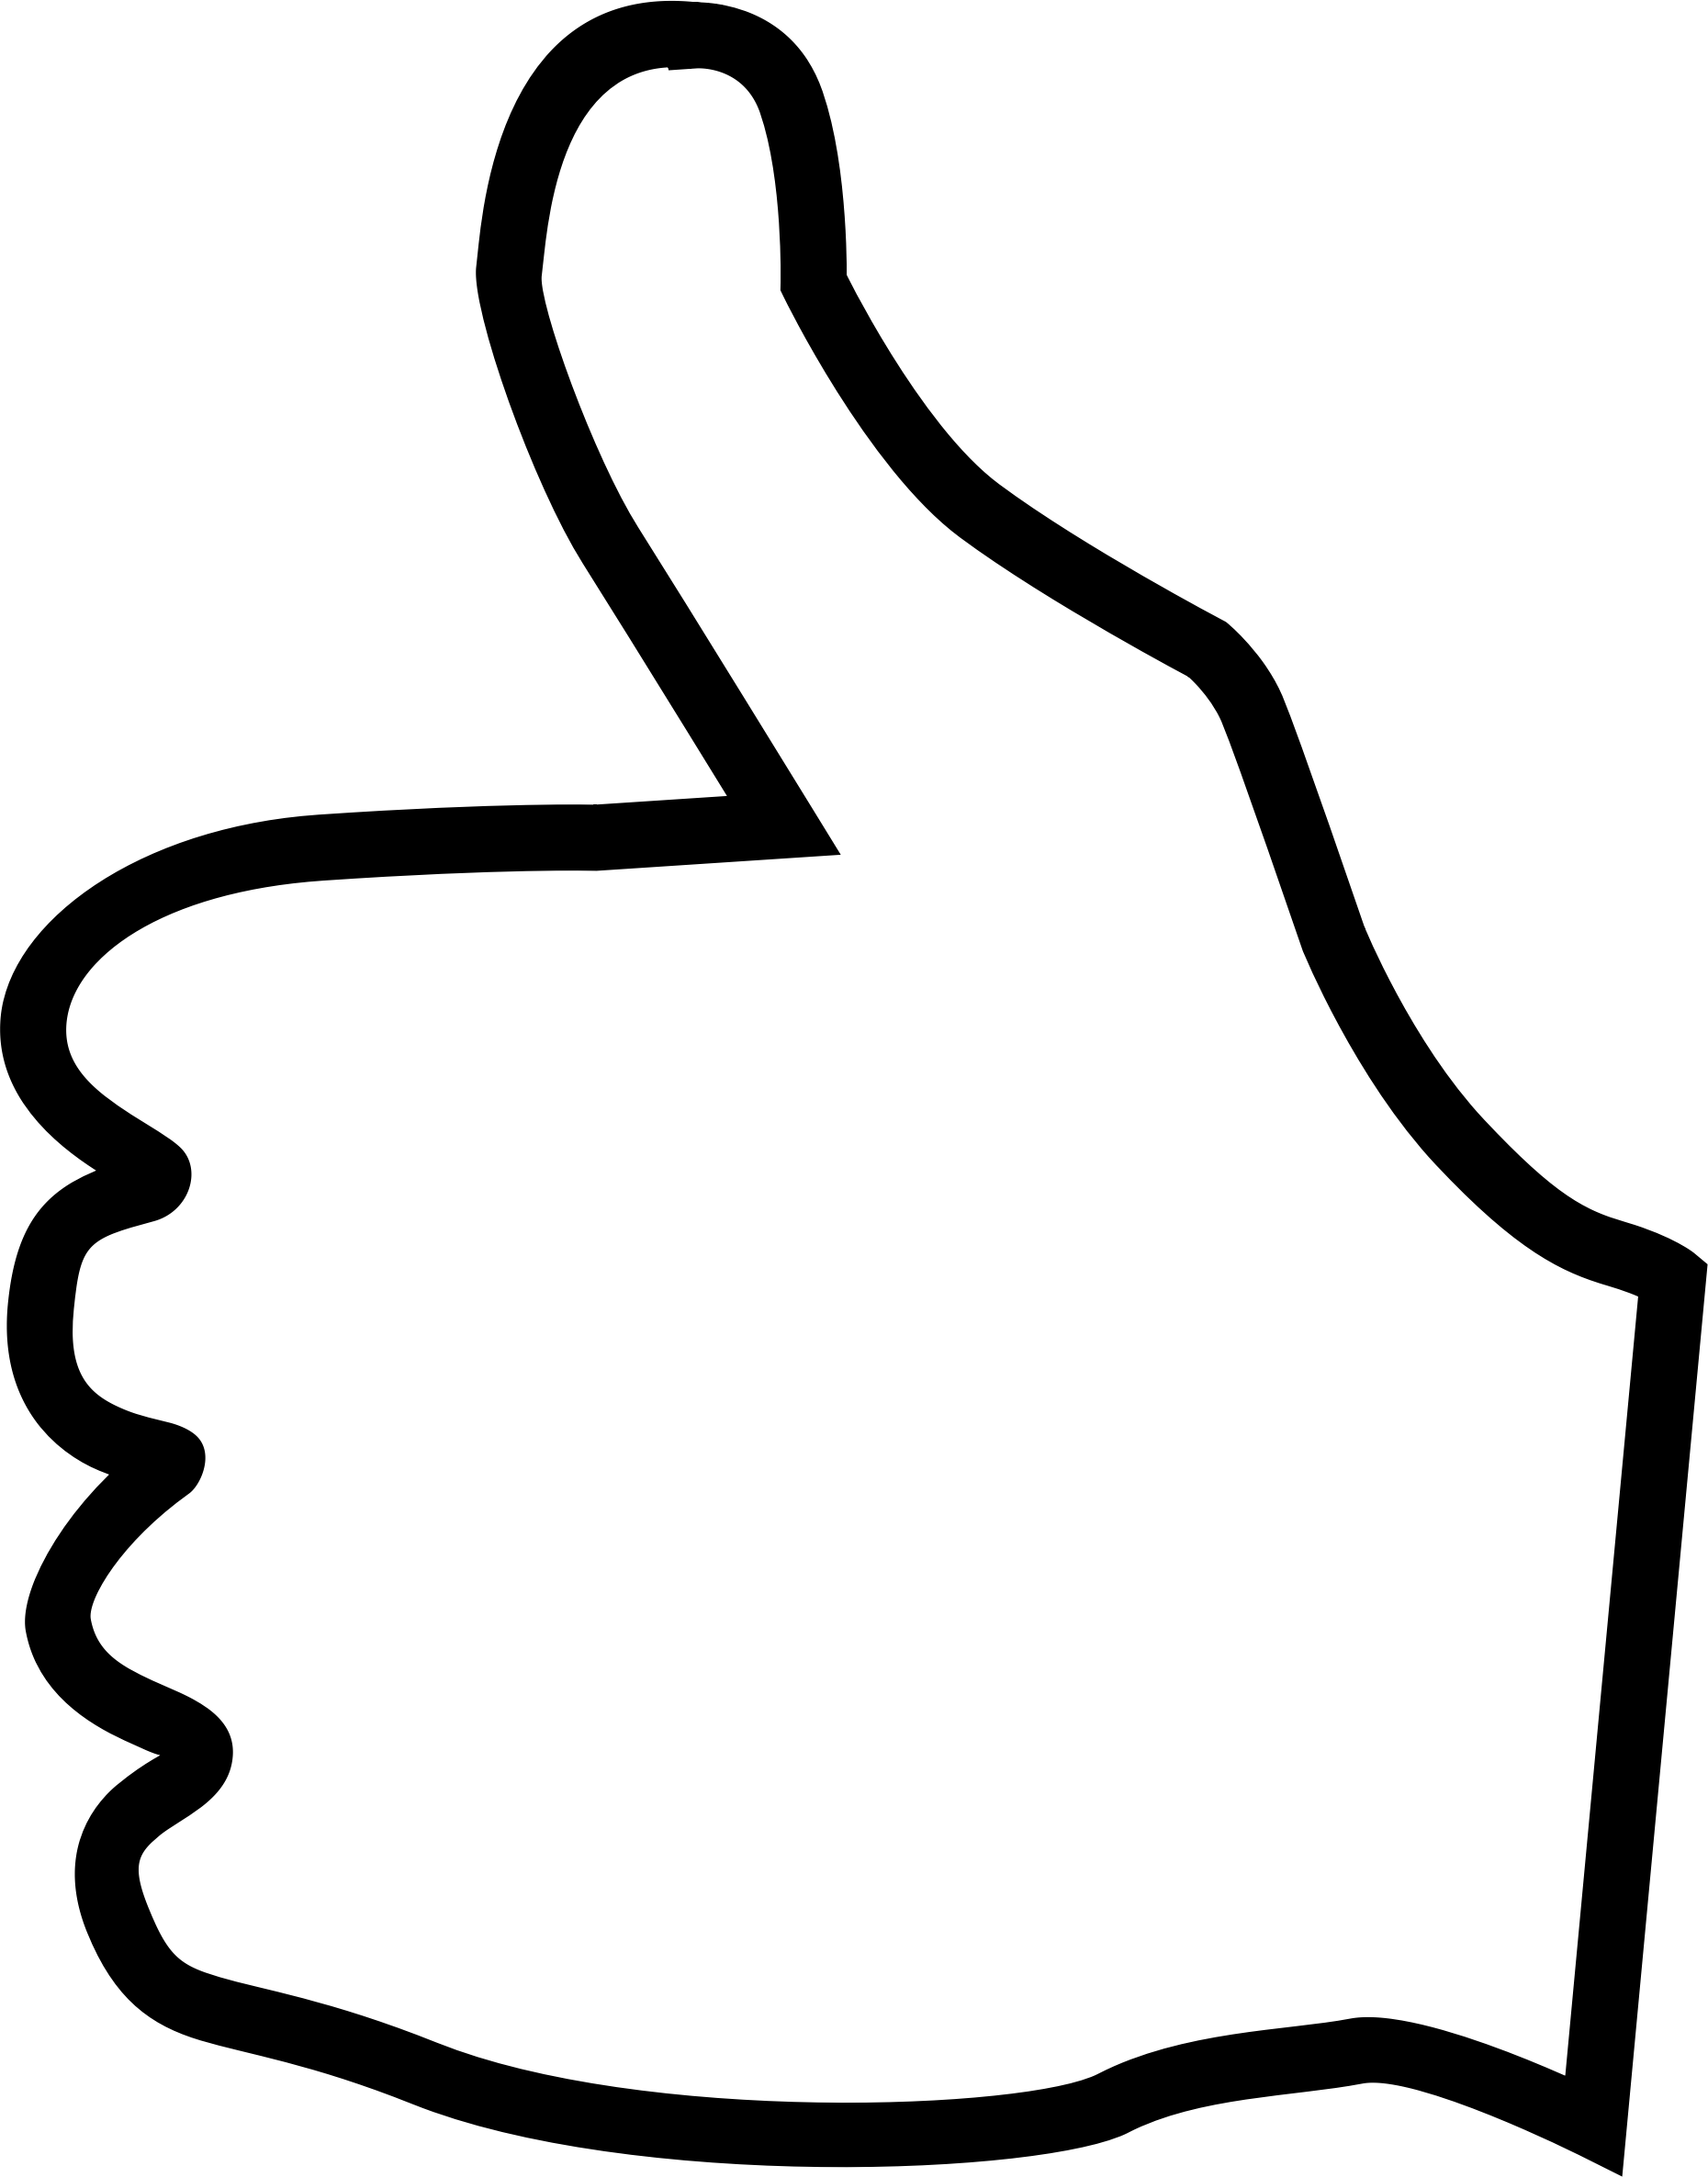 Smile thumbs up clip art clip